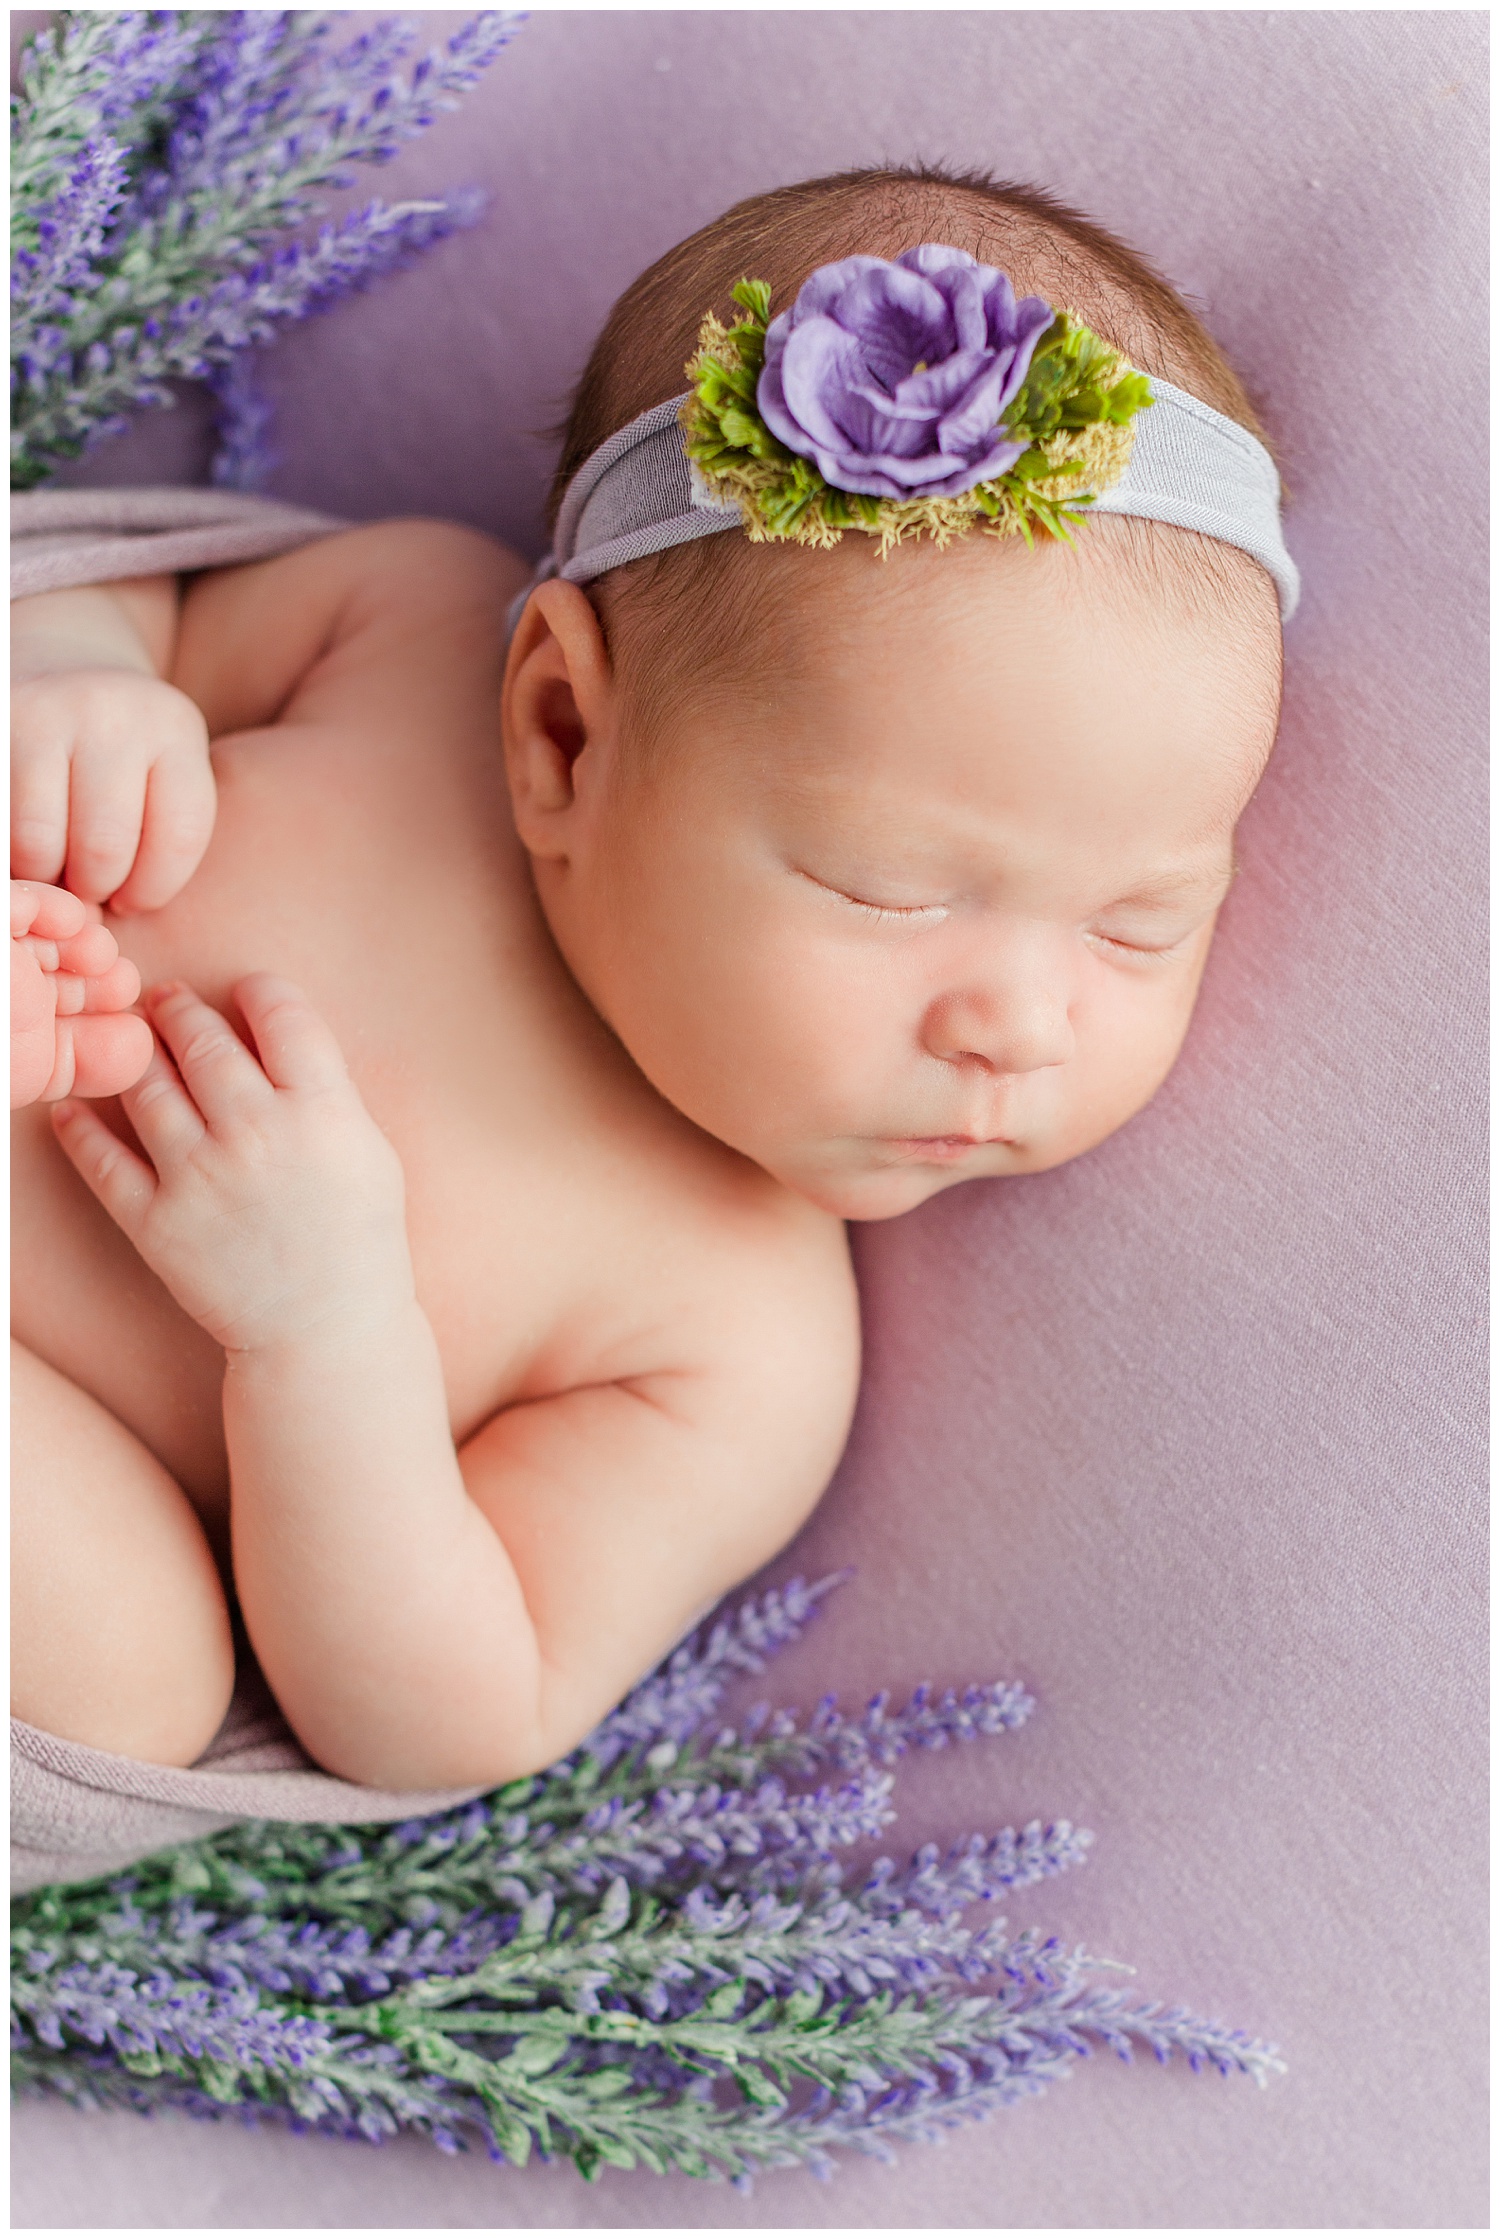 Baby Emma snuggled up with purple tones and spring florals | CB Studio